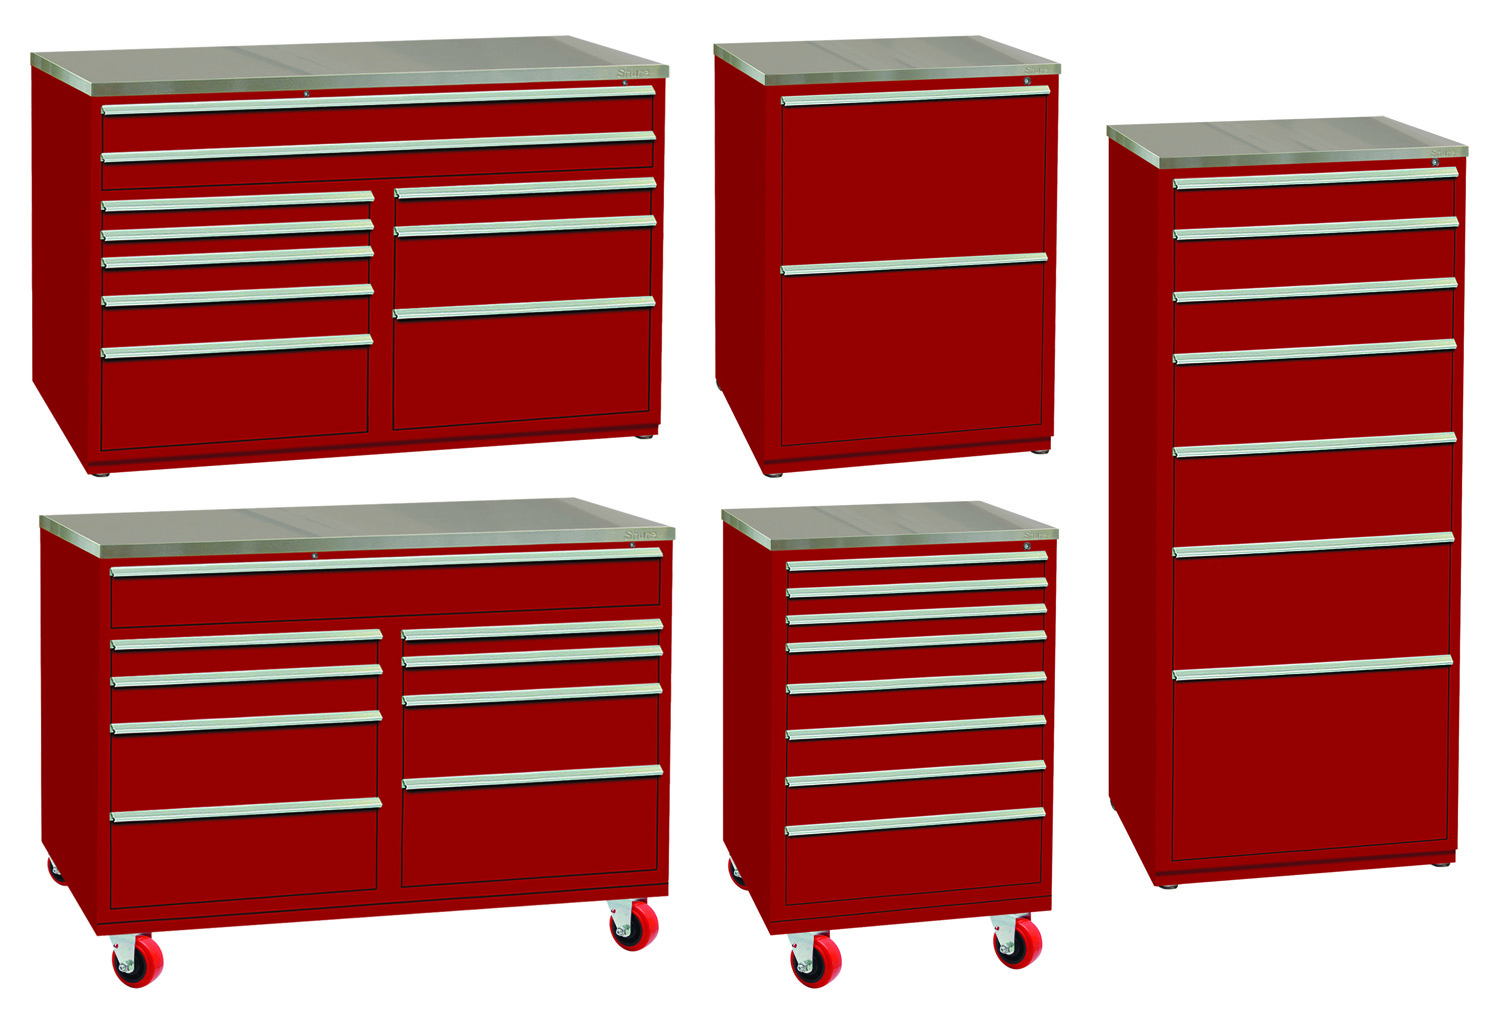 Shure’s New Stationary & Portable Tool Storage Cabinets